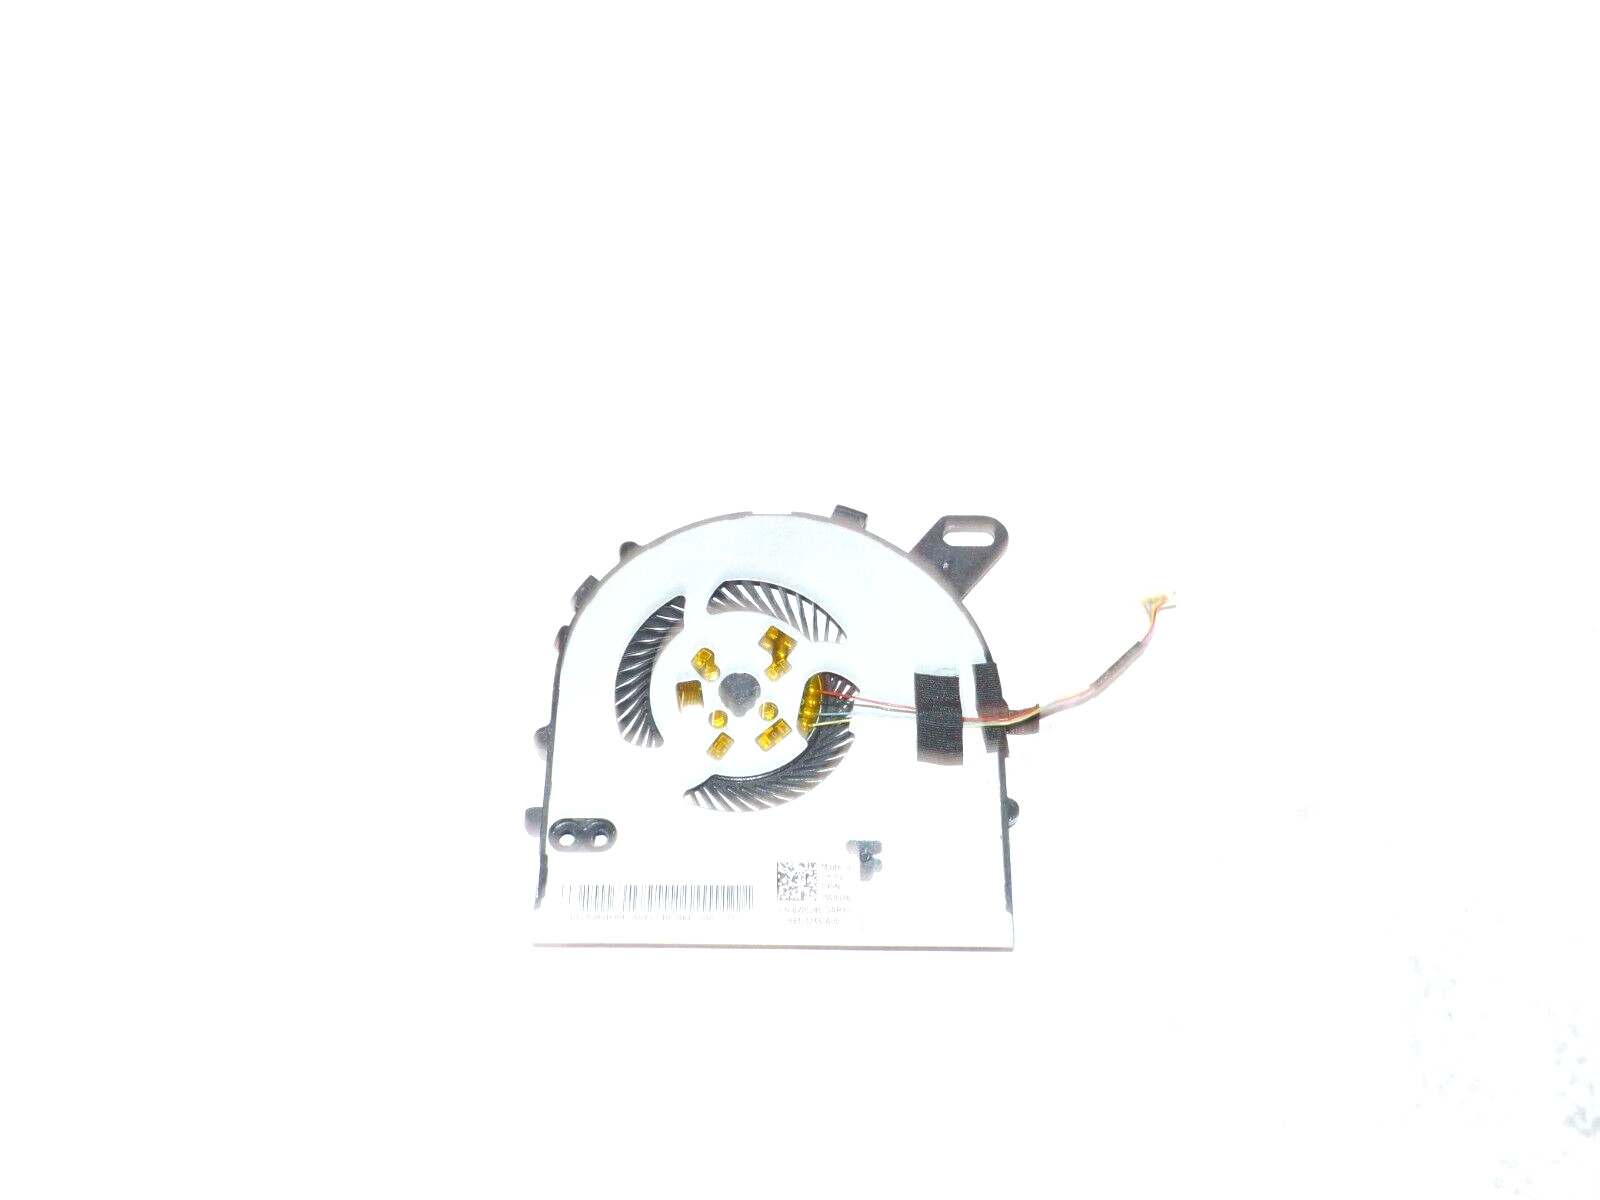 Dell OEM Inspiron 15 7572 7560 Vostro 5468 5568 CPU Cooling Fan AMA01 W0J85